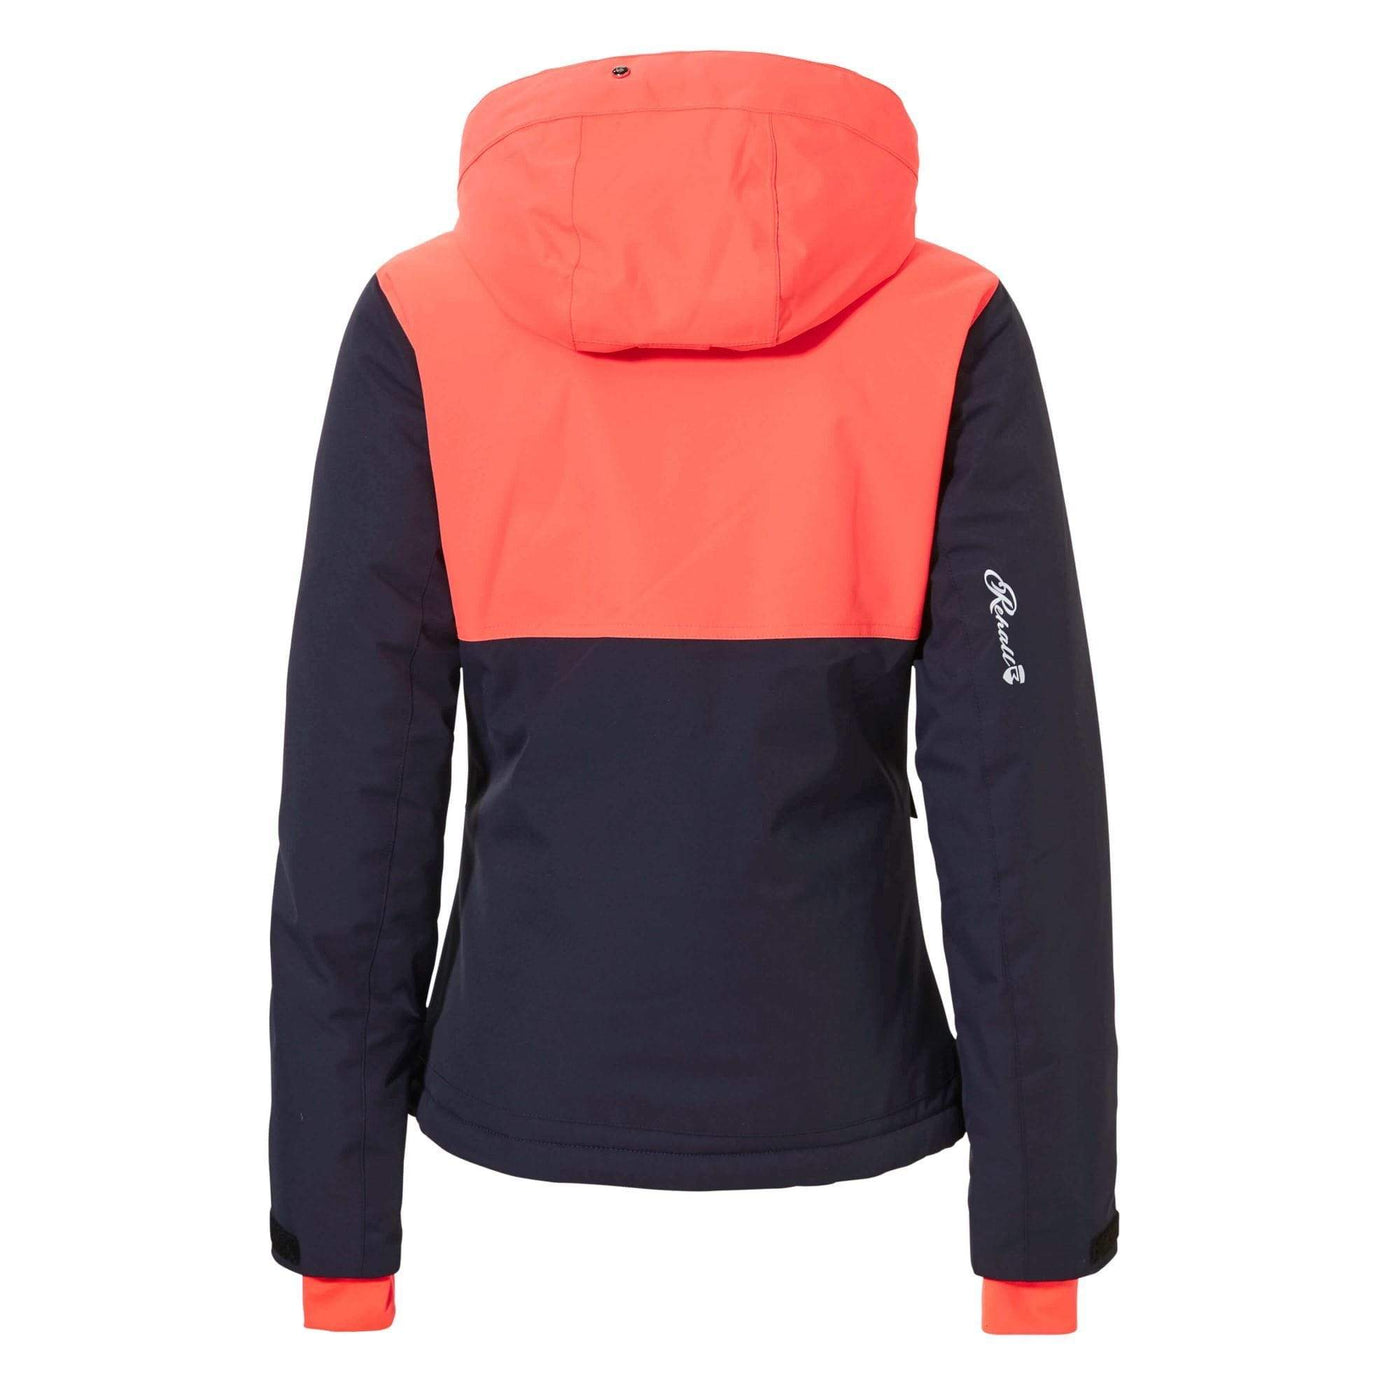 Rehall Outerwear Jacket Rehall Emmy Girls Snow Jacket - Hot Coral